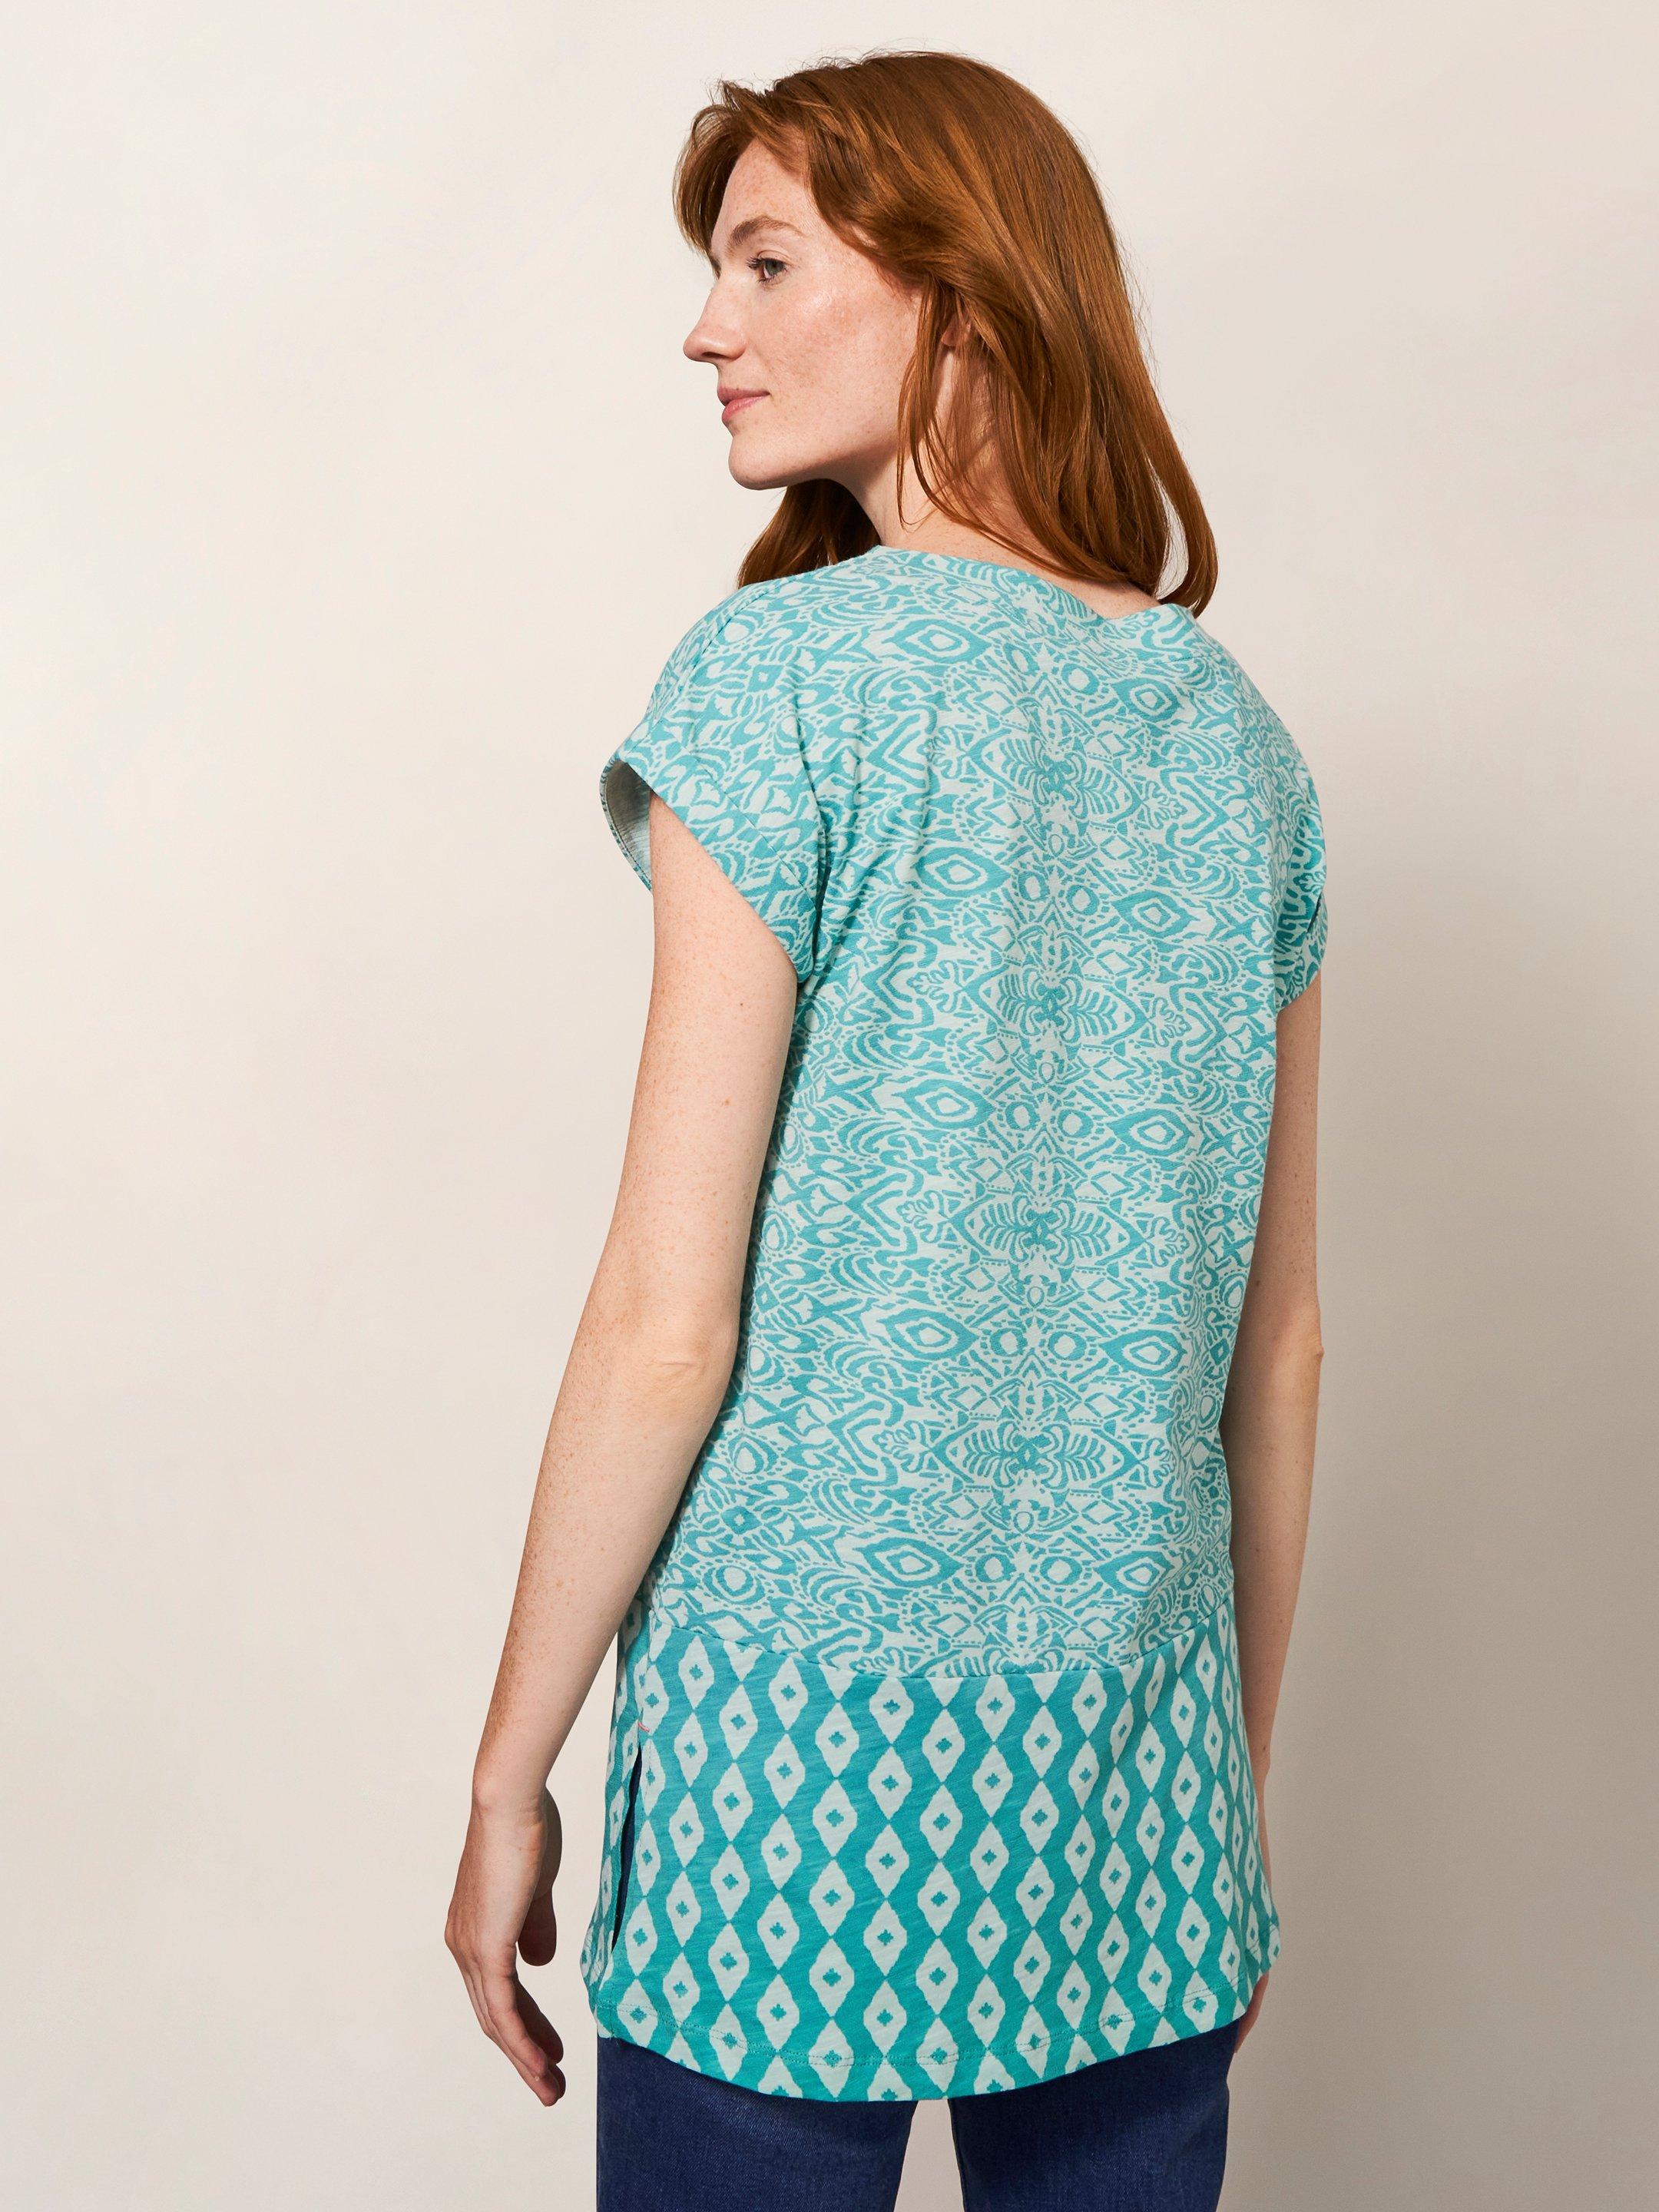 CARRIE TUNIC in TEAL PR - MODEL BACK